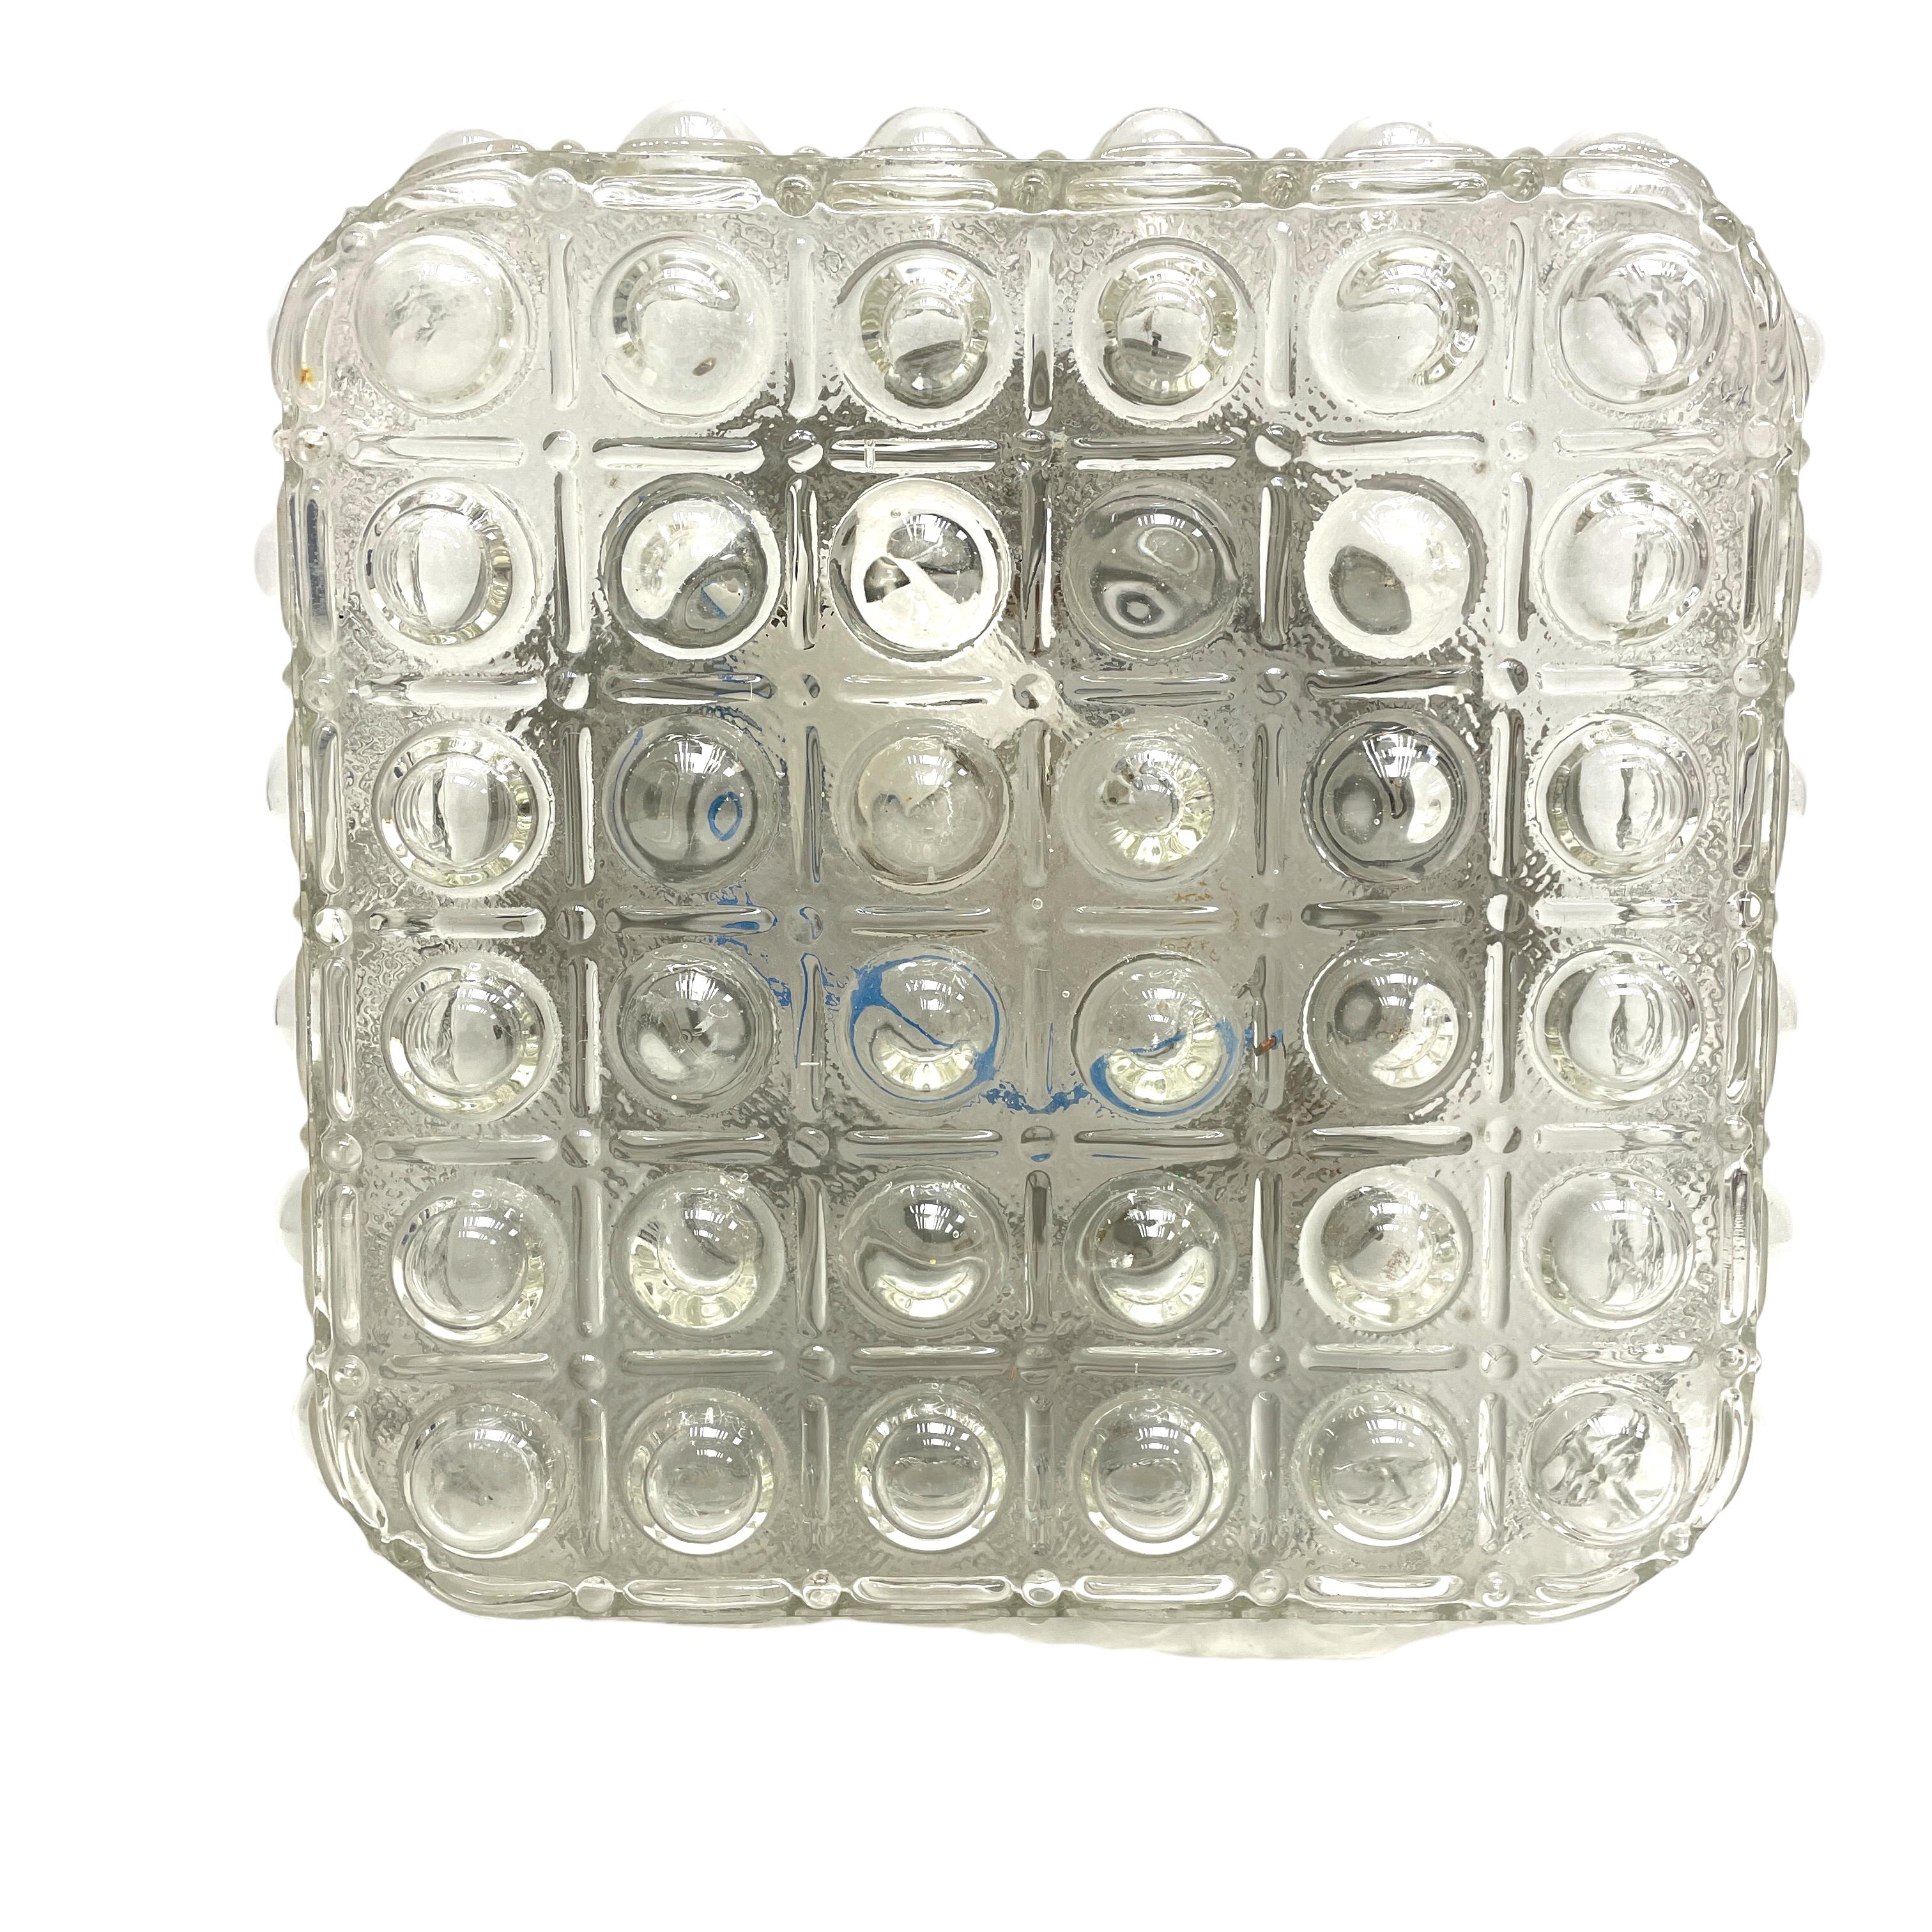 Beautiful bubble glass pattern flush mount. Made in Germany by Glashütte Limburg. Gorgeous textured glass flush mount with metal fixture. The fixture requires one European E27 Edison or Medium bulb up to 60 watts.